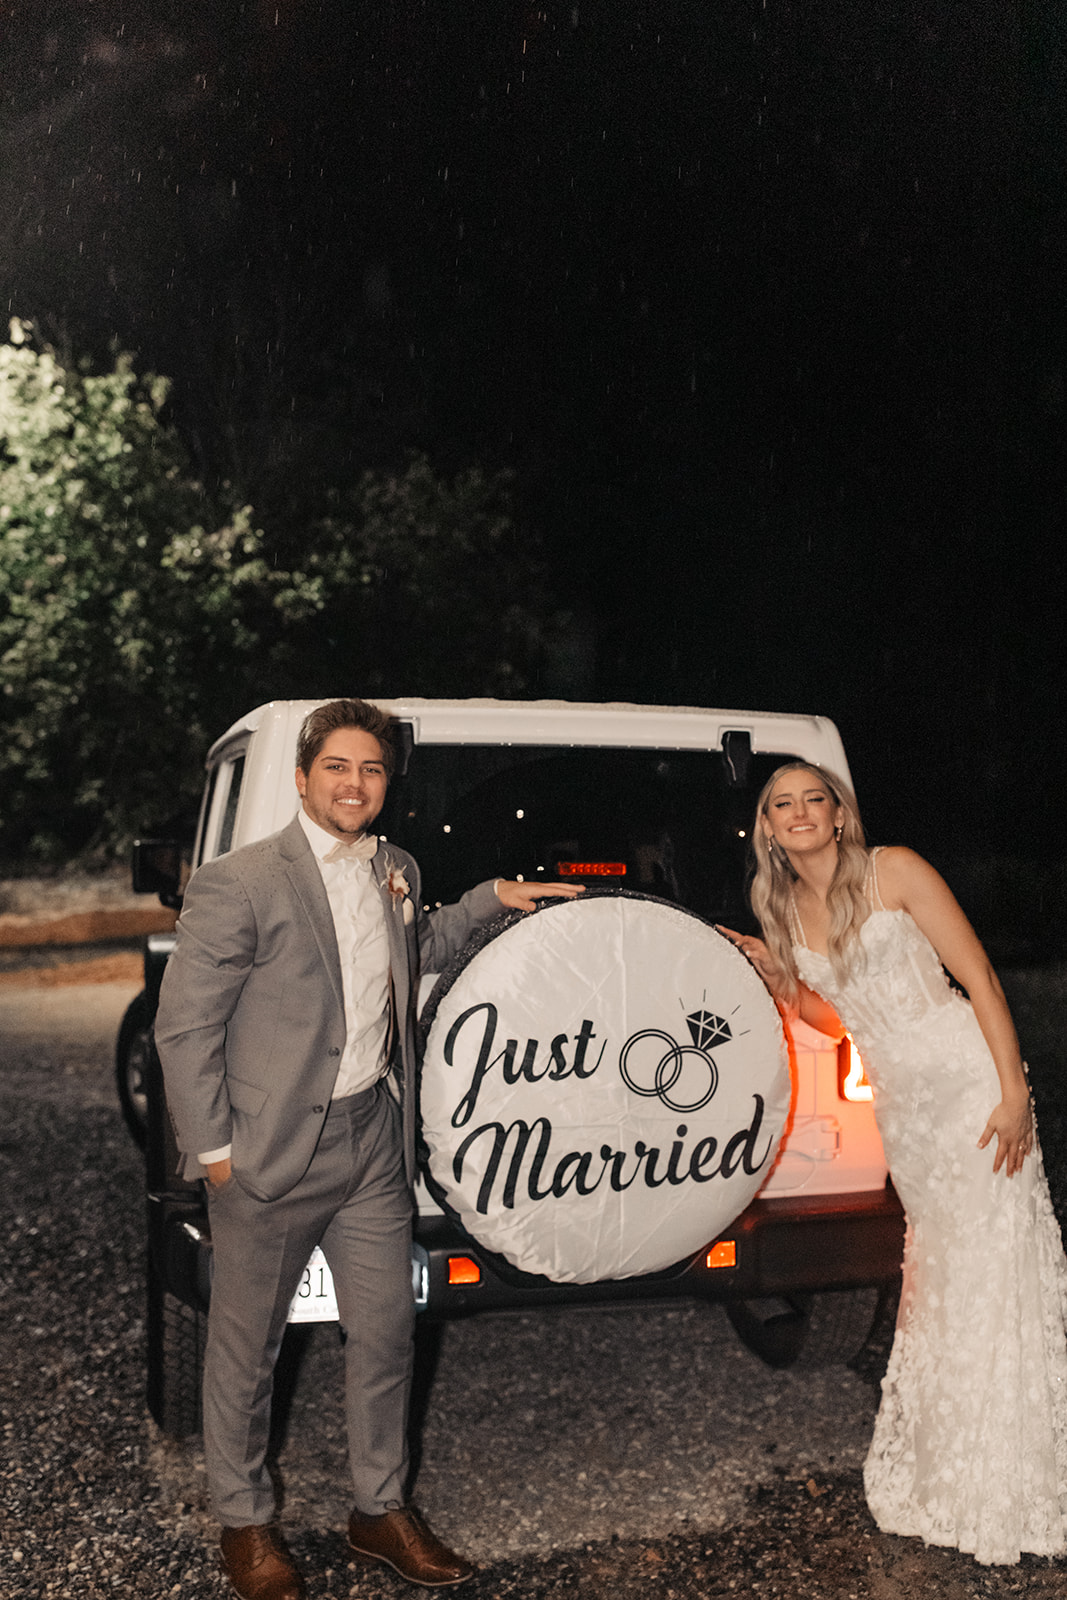 the couple standing next to their just married car